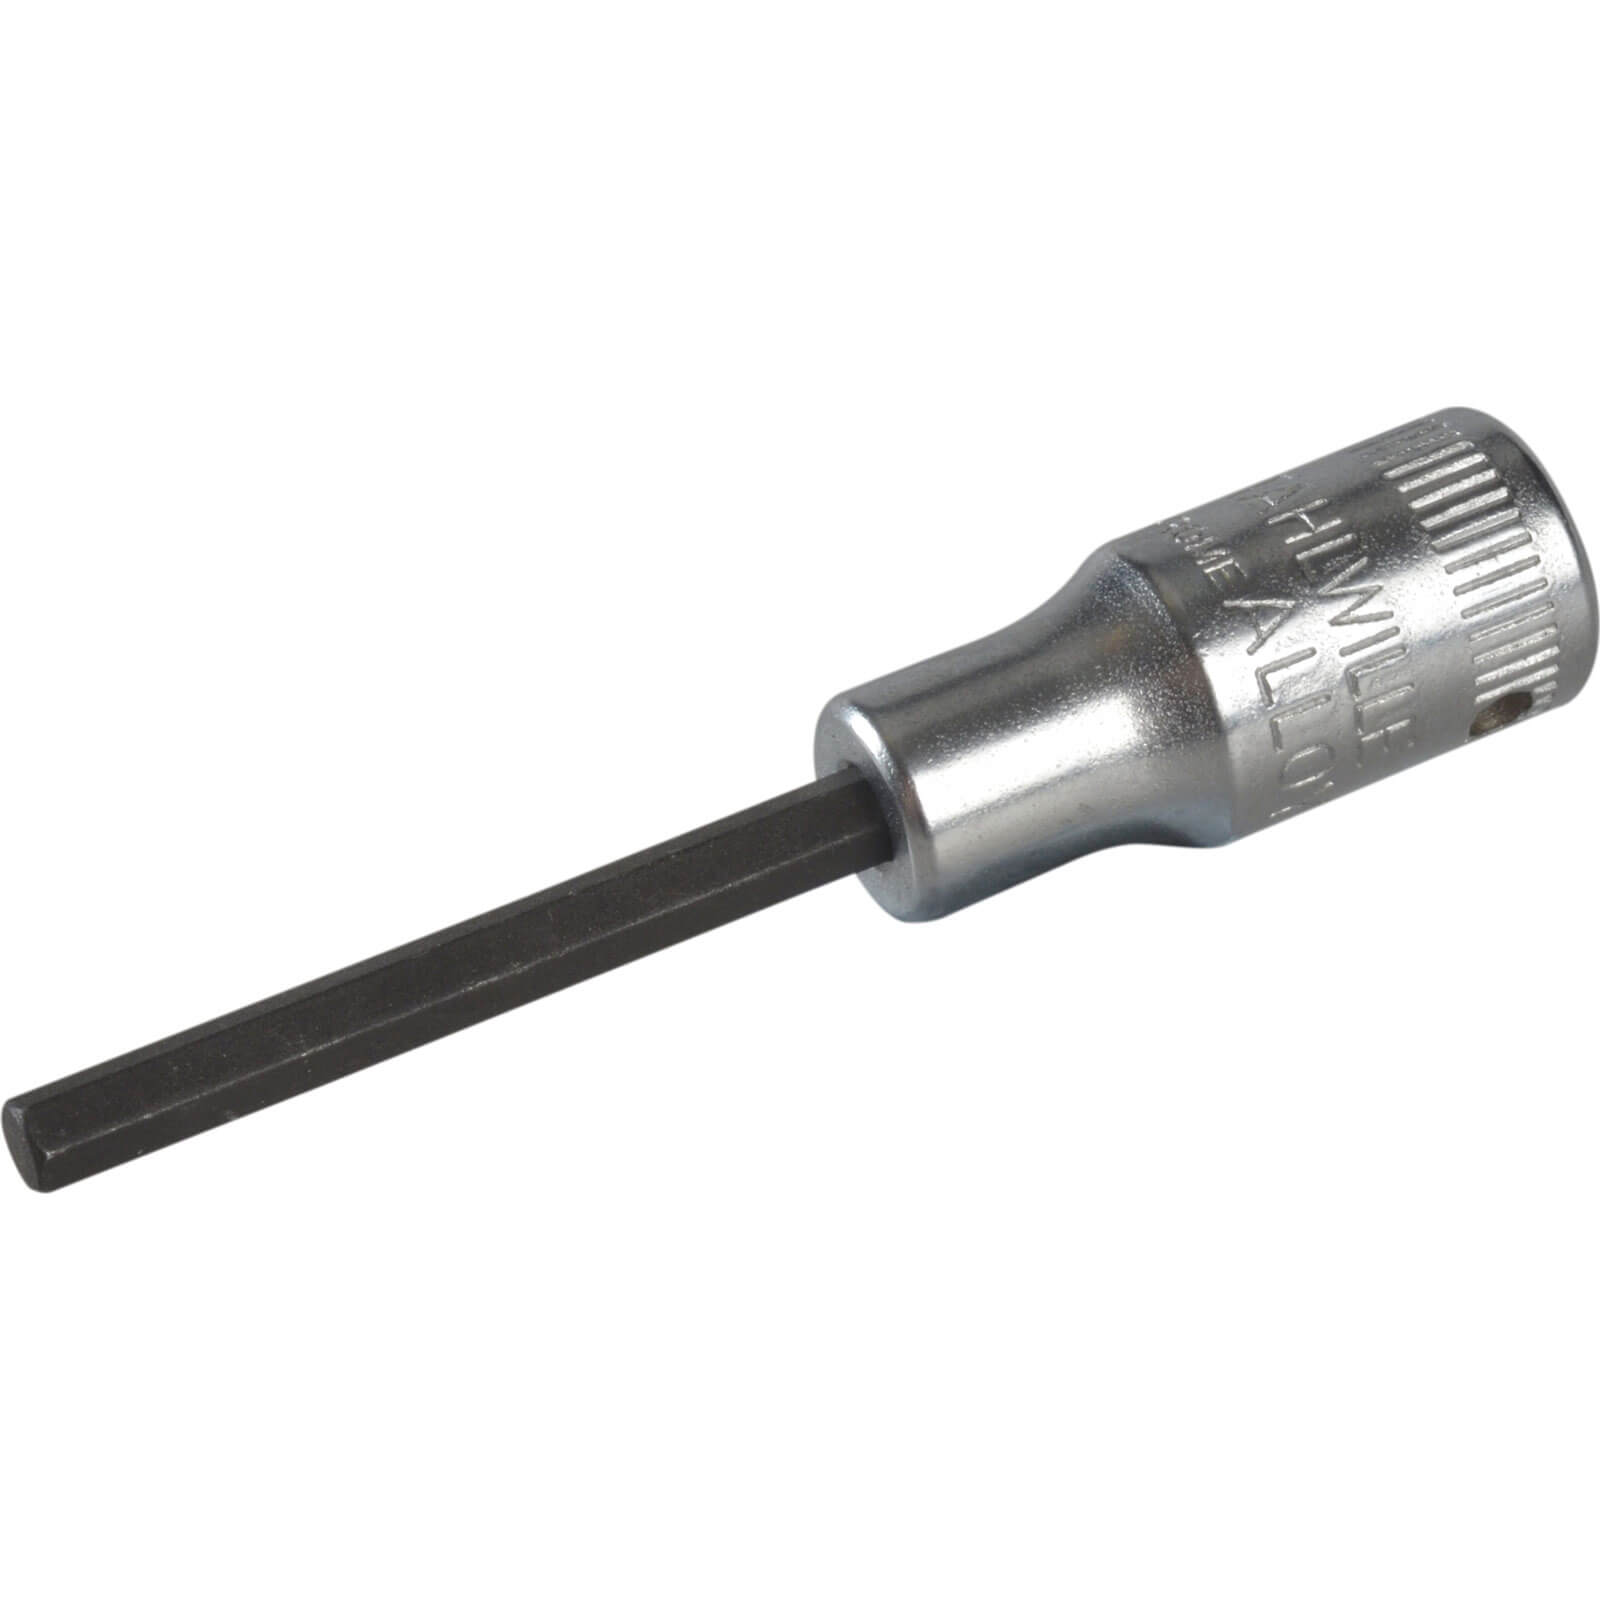 Image of Stahlwille 1/4" Drive Hexagon Socket Bit Imperial 1/4" 1/8"